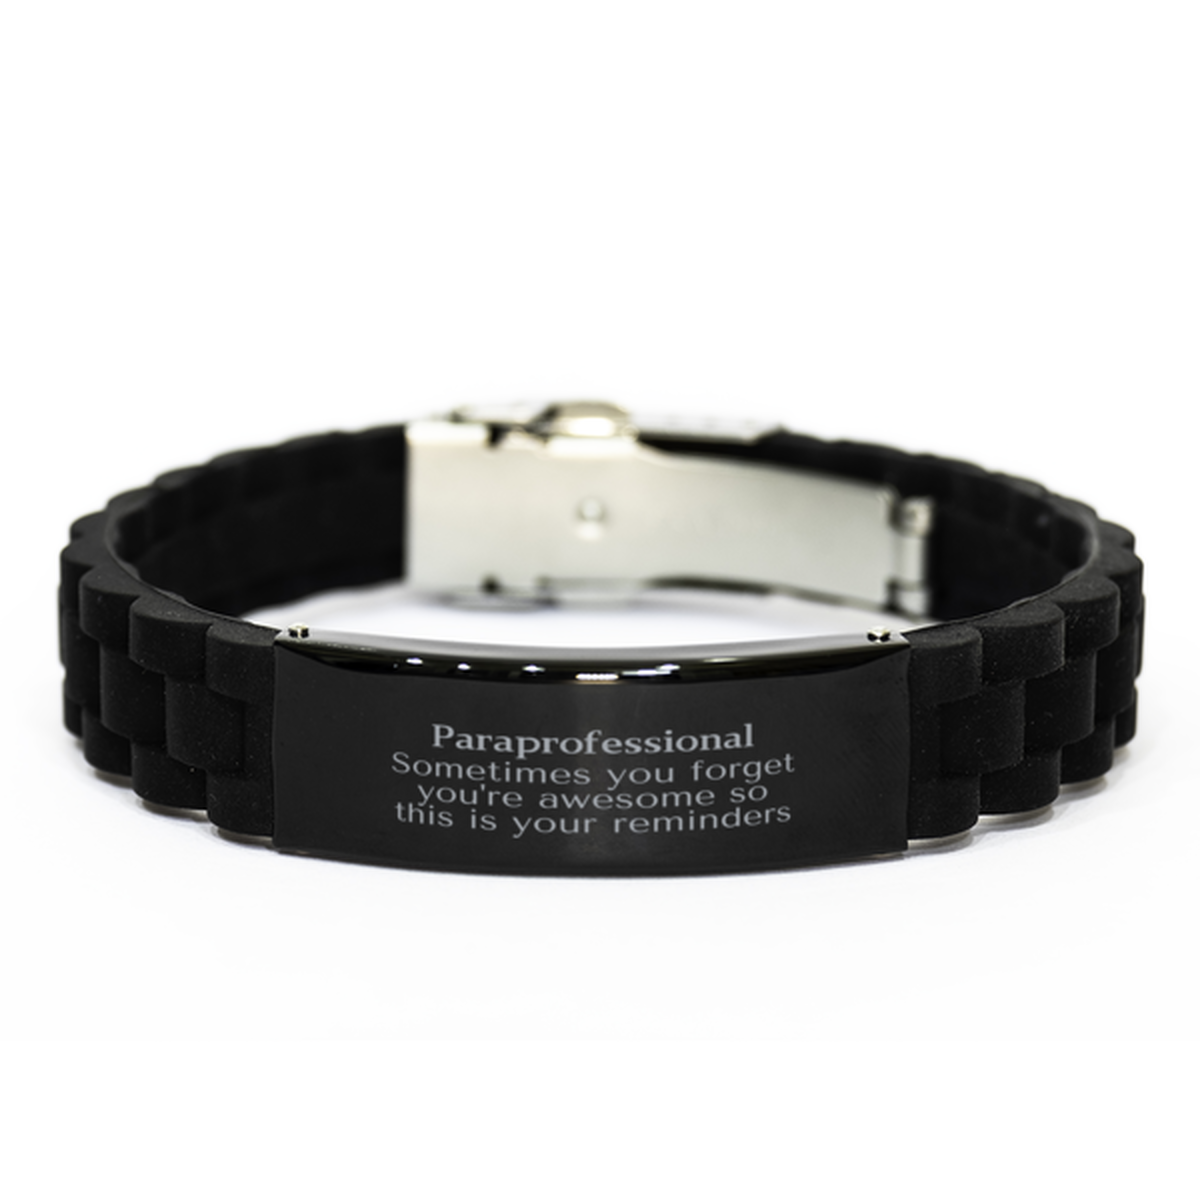 Sentimental Paraprofessional Black Glidelock Clasp Bracelet, Paraprofessional Sometimes you forget you're awesome so this is your reminders, Graduation Christmas Birthday Gifts for Paraprofessional, Men, Women, Coworkers